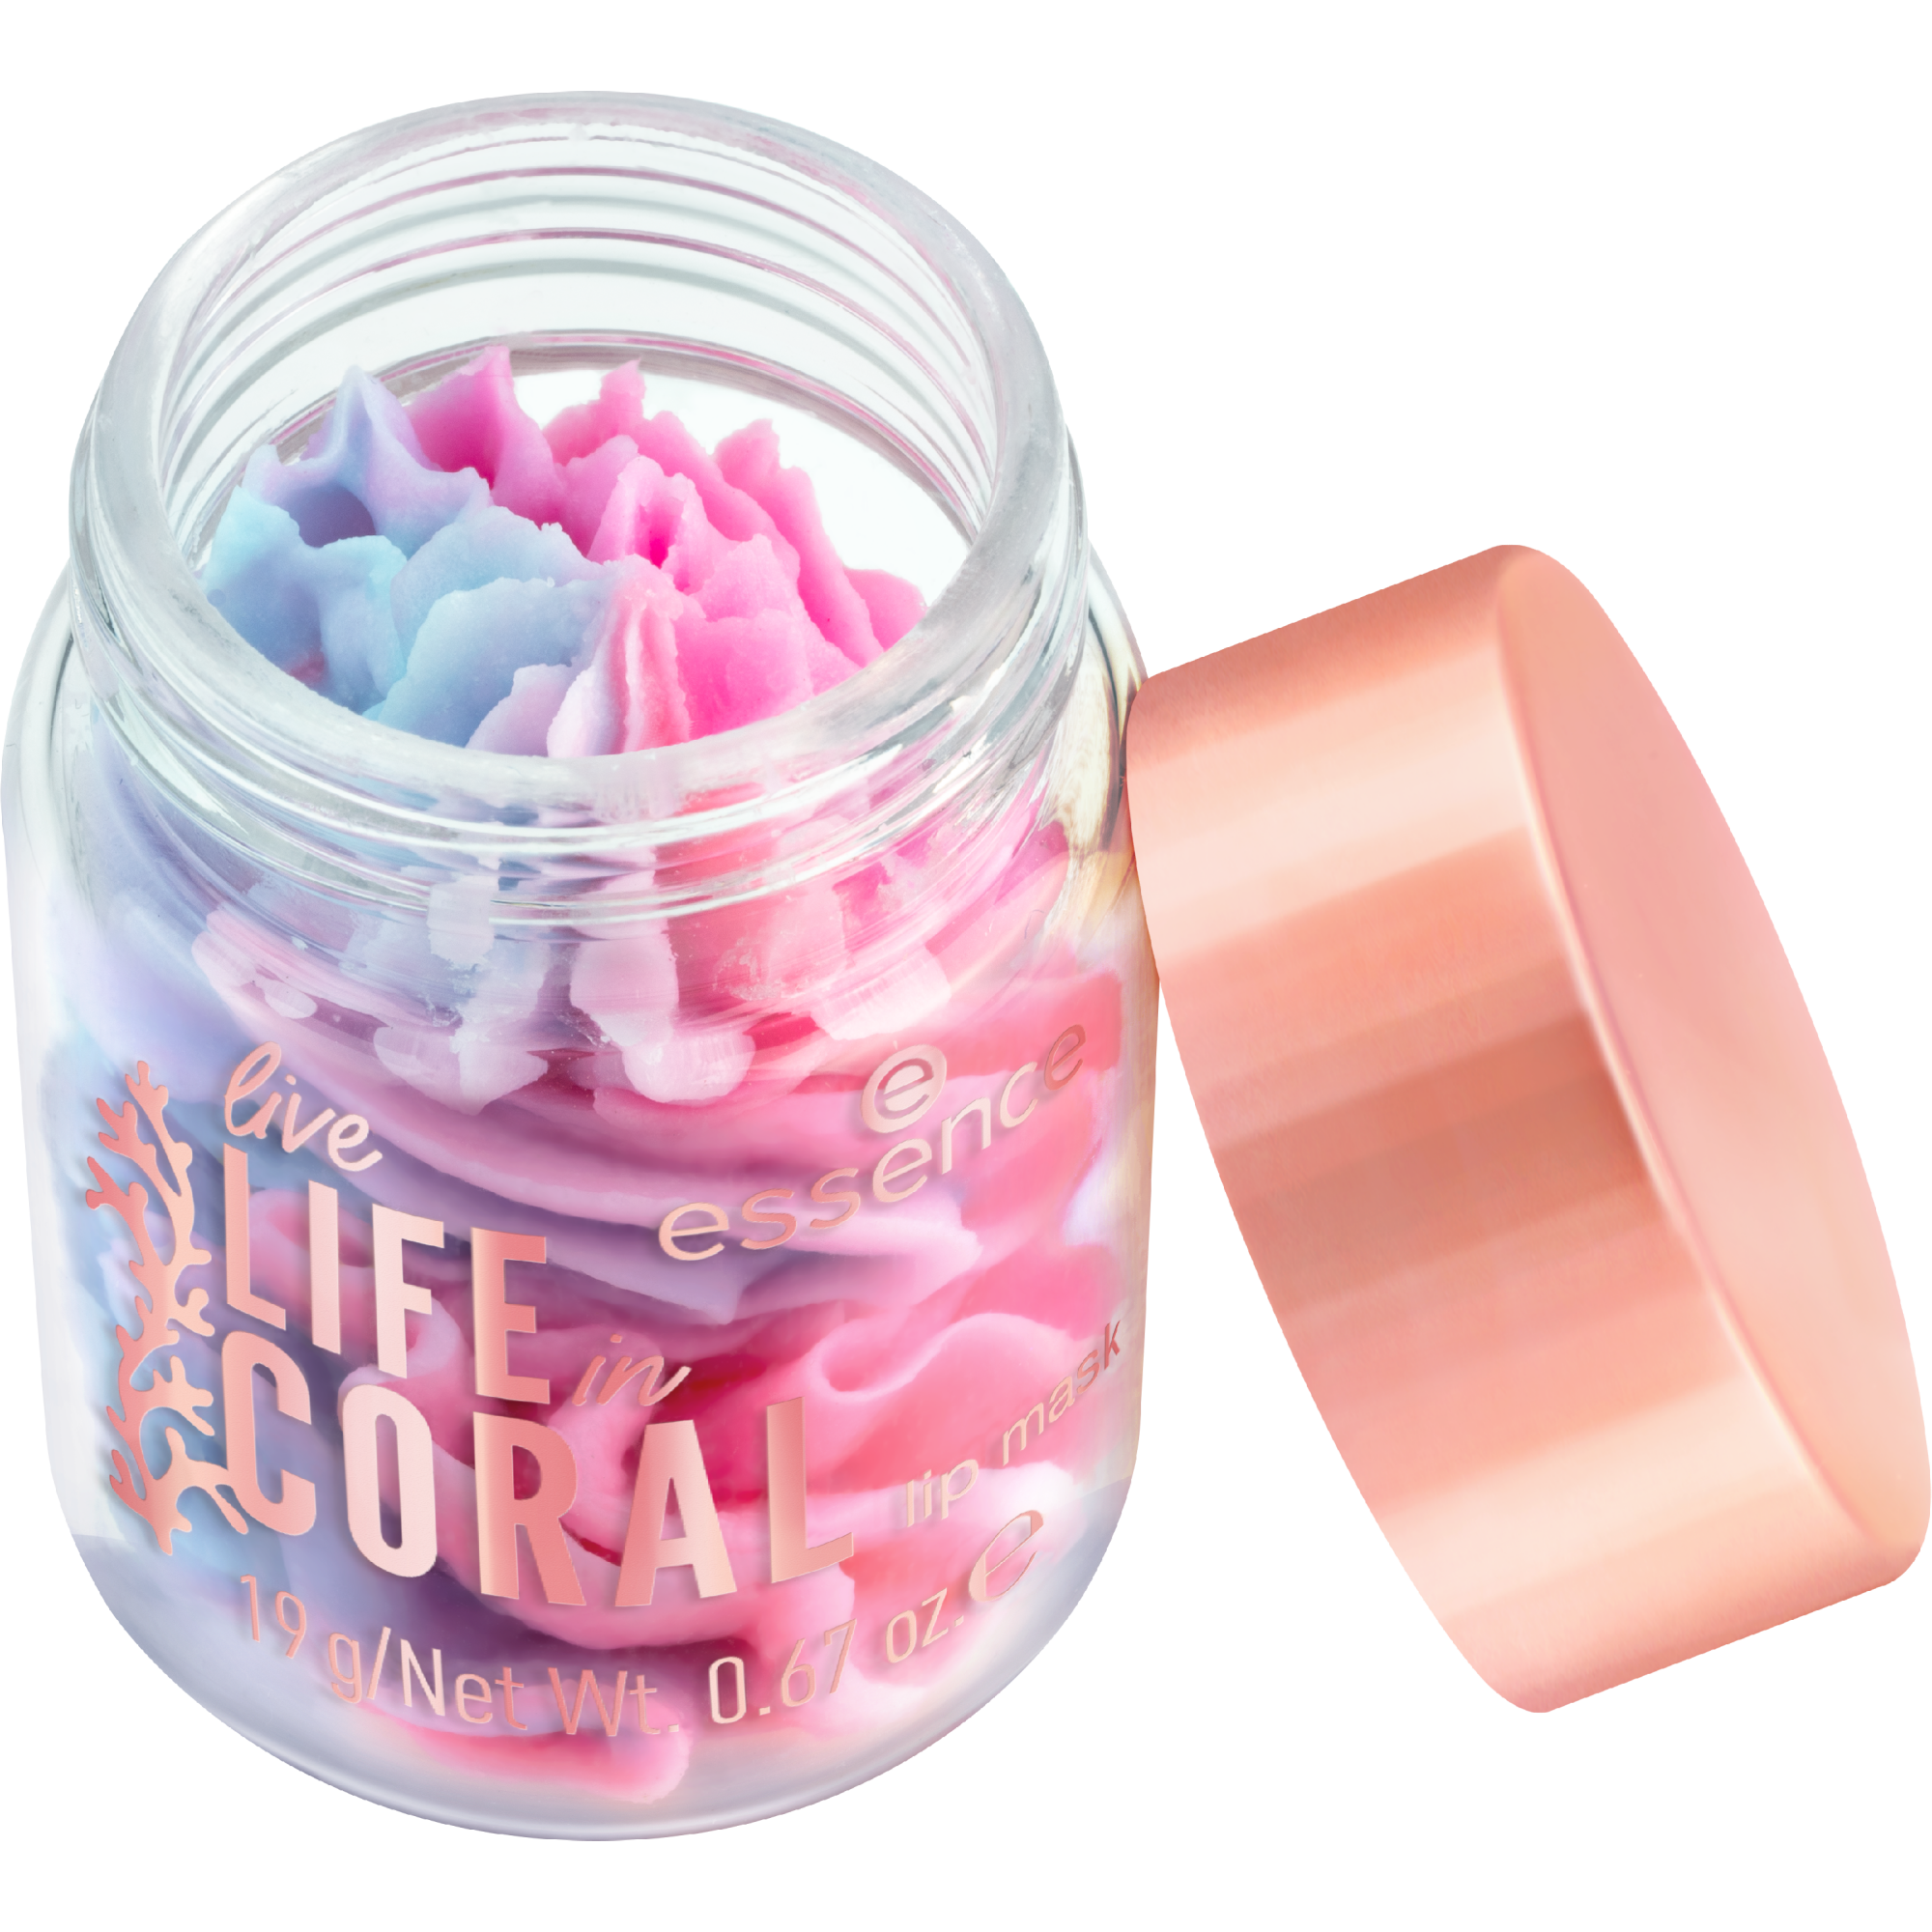 live LIFE in CORAL lip mask